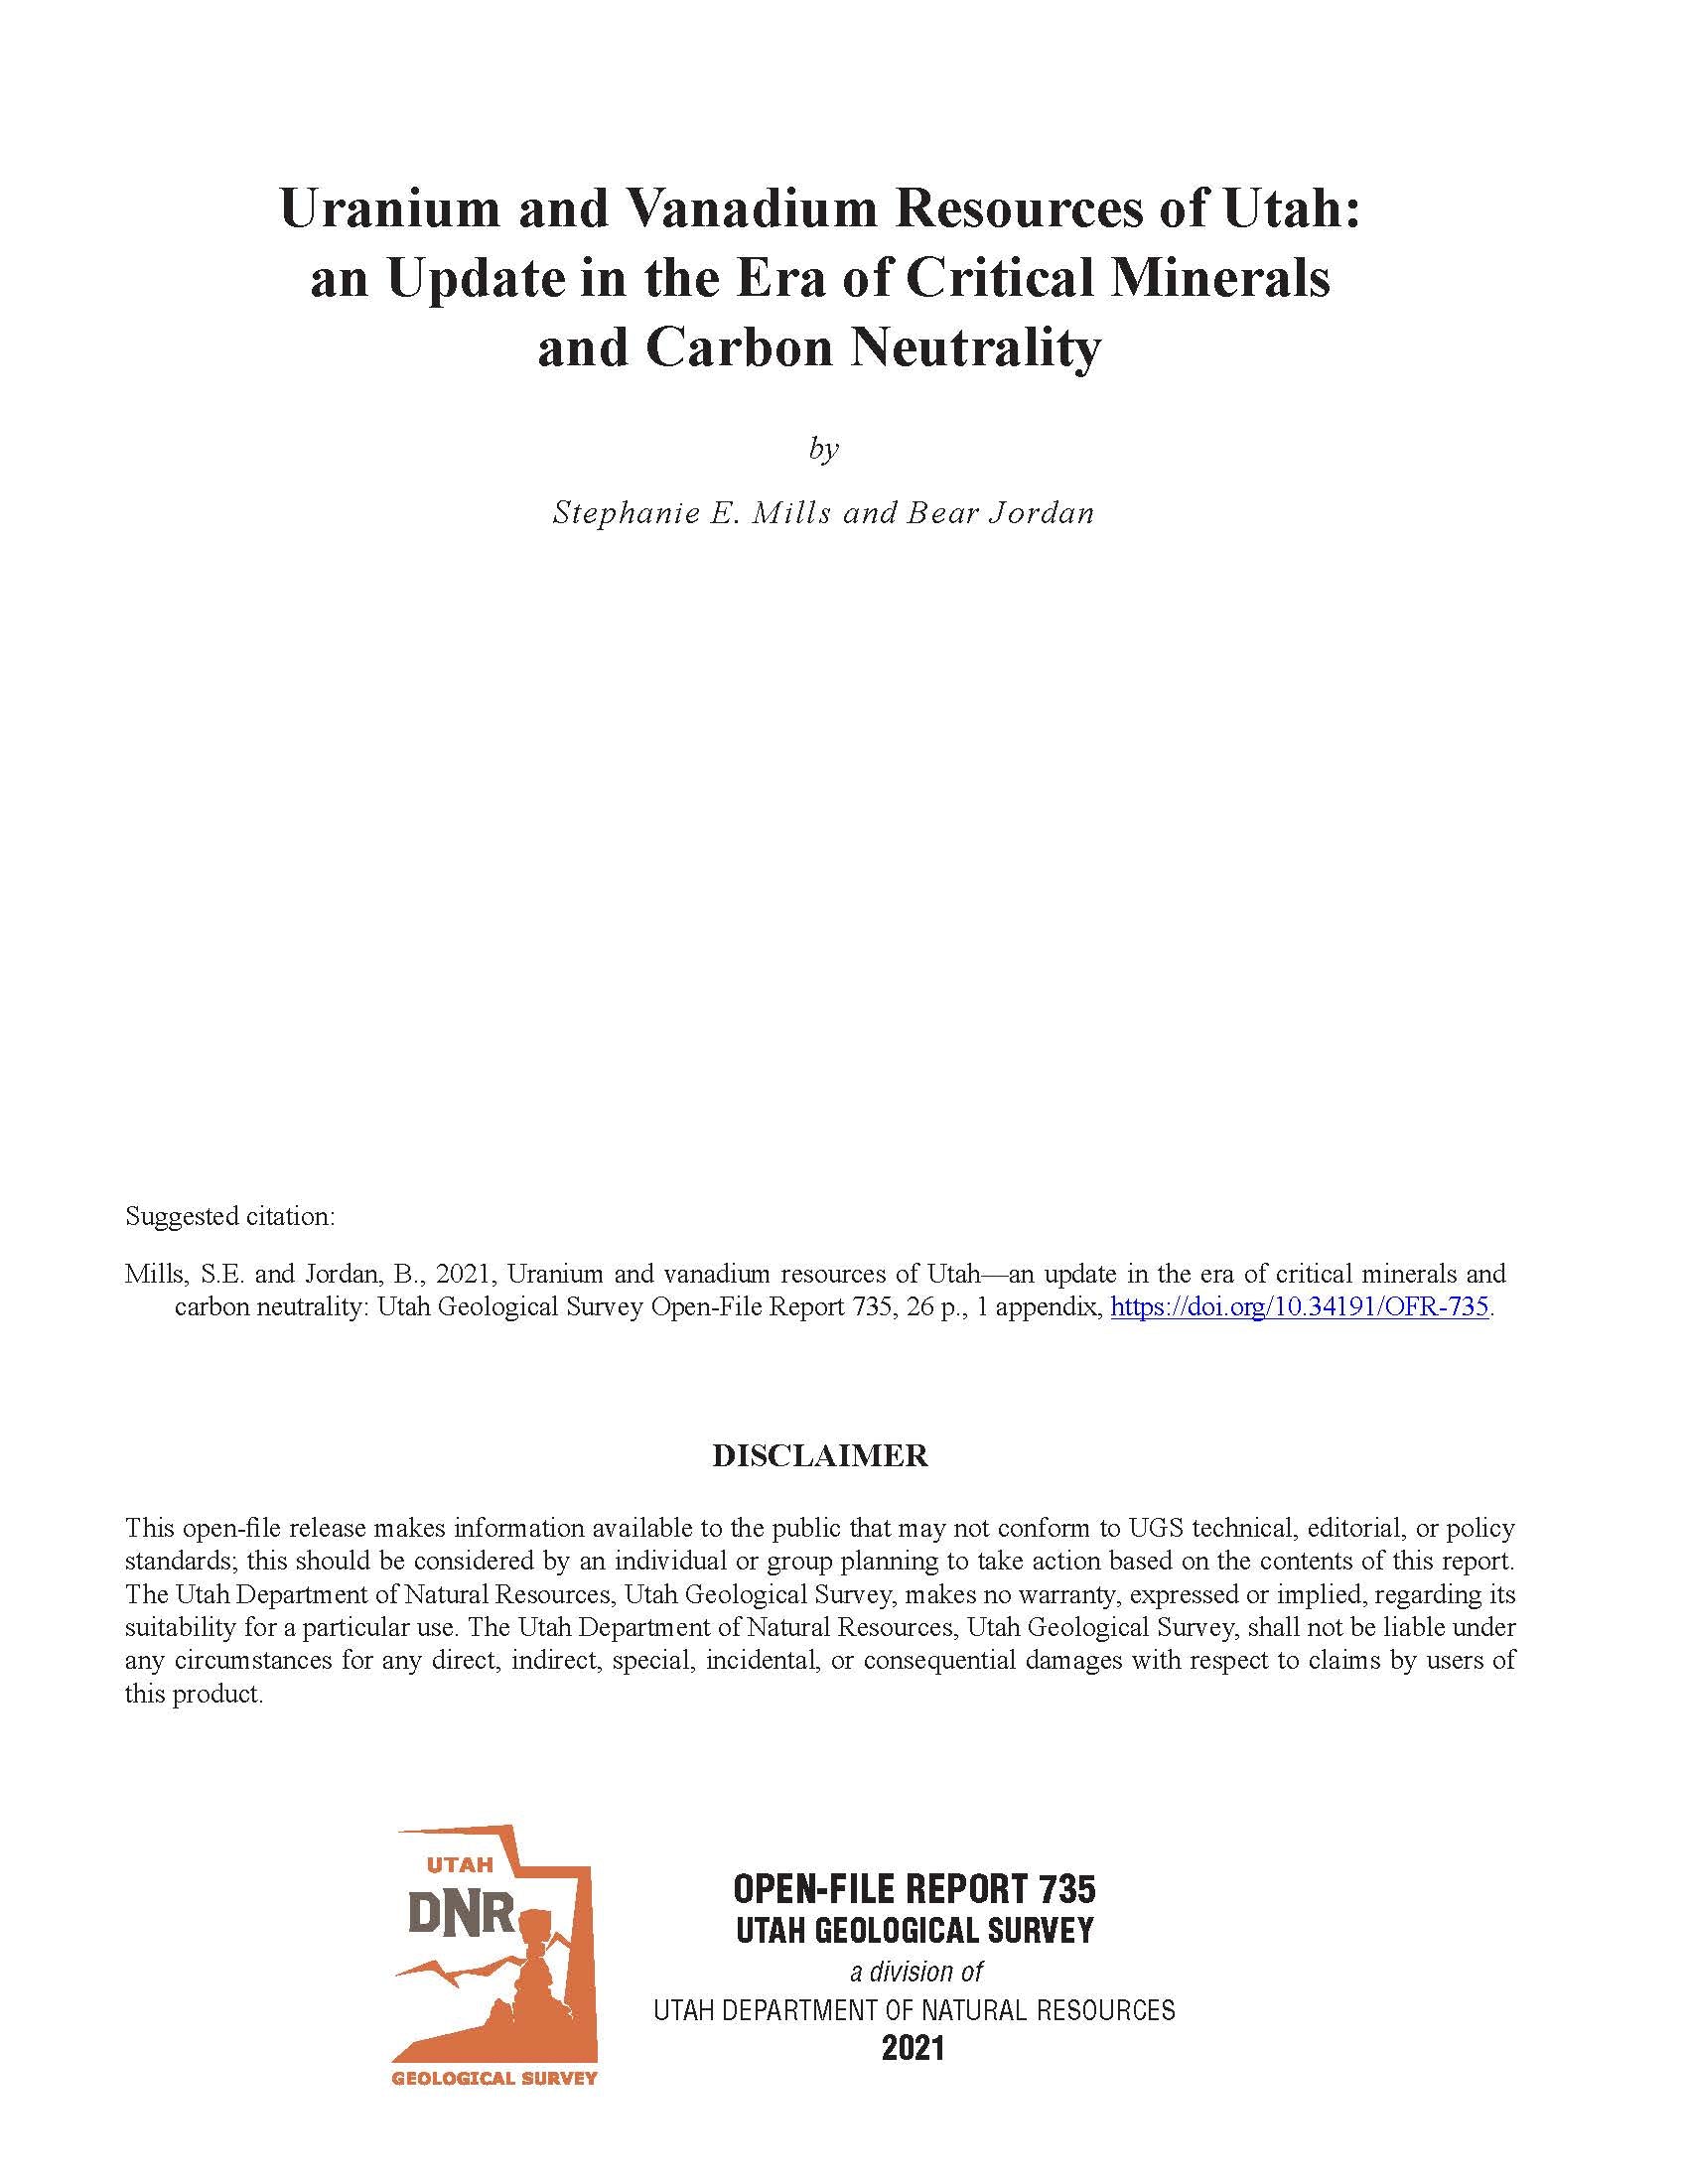 Uranium and Vanadium Resources of Utah: An Update in the Era of Critical Minerals and Carbon Neutrality (OFR-735)